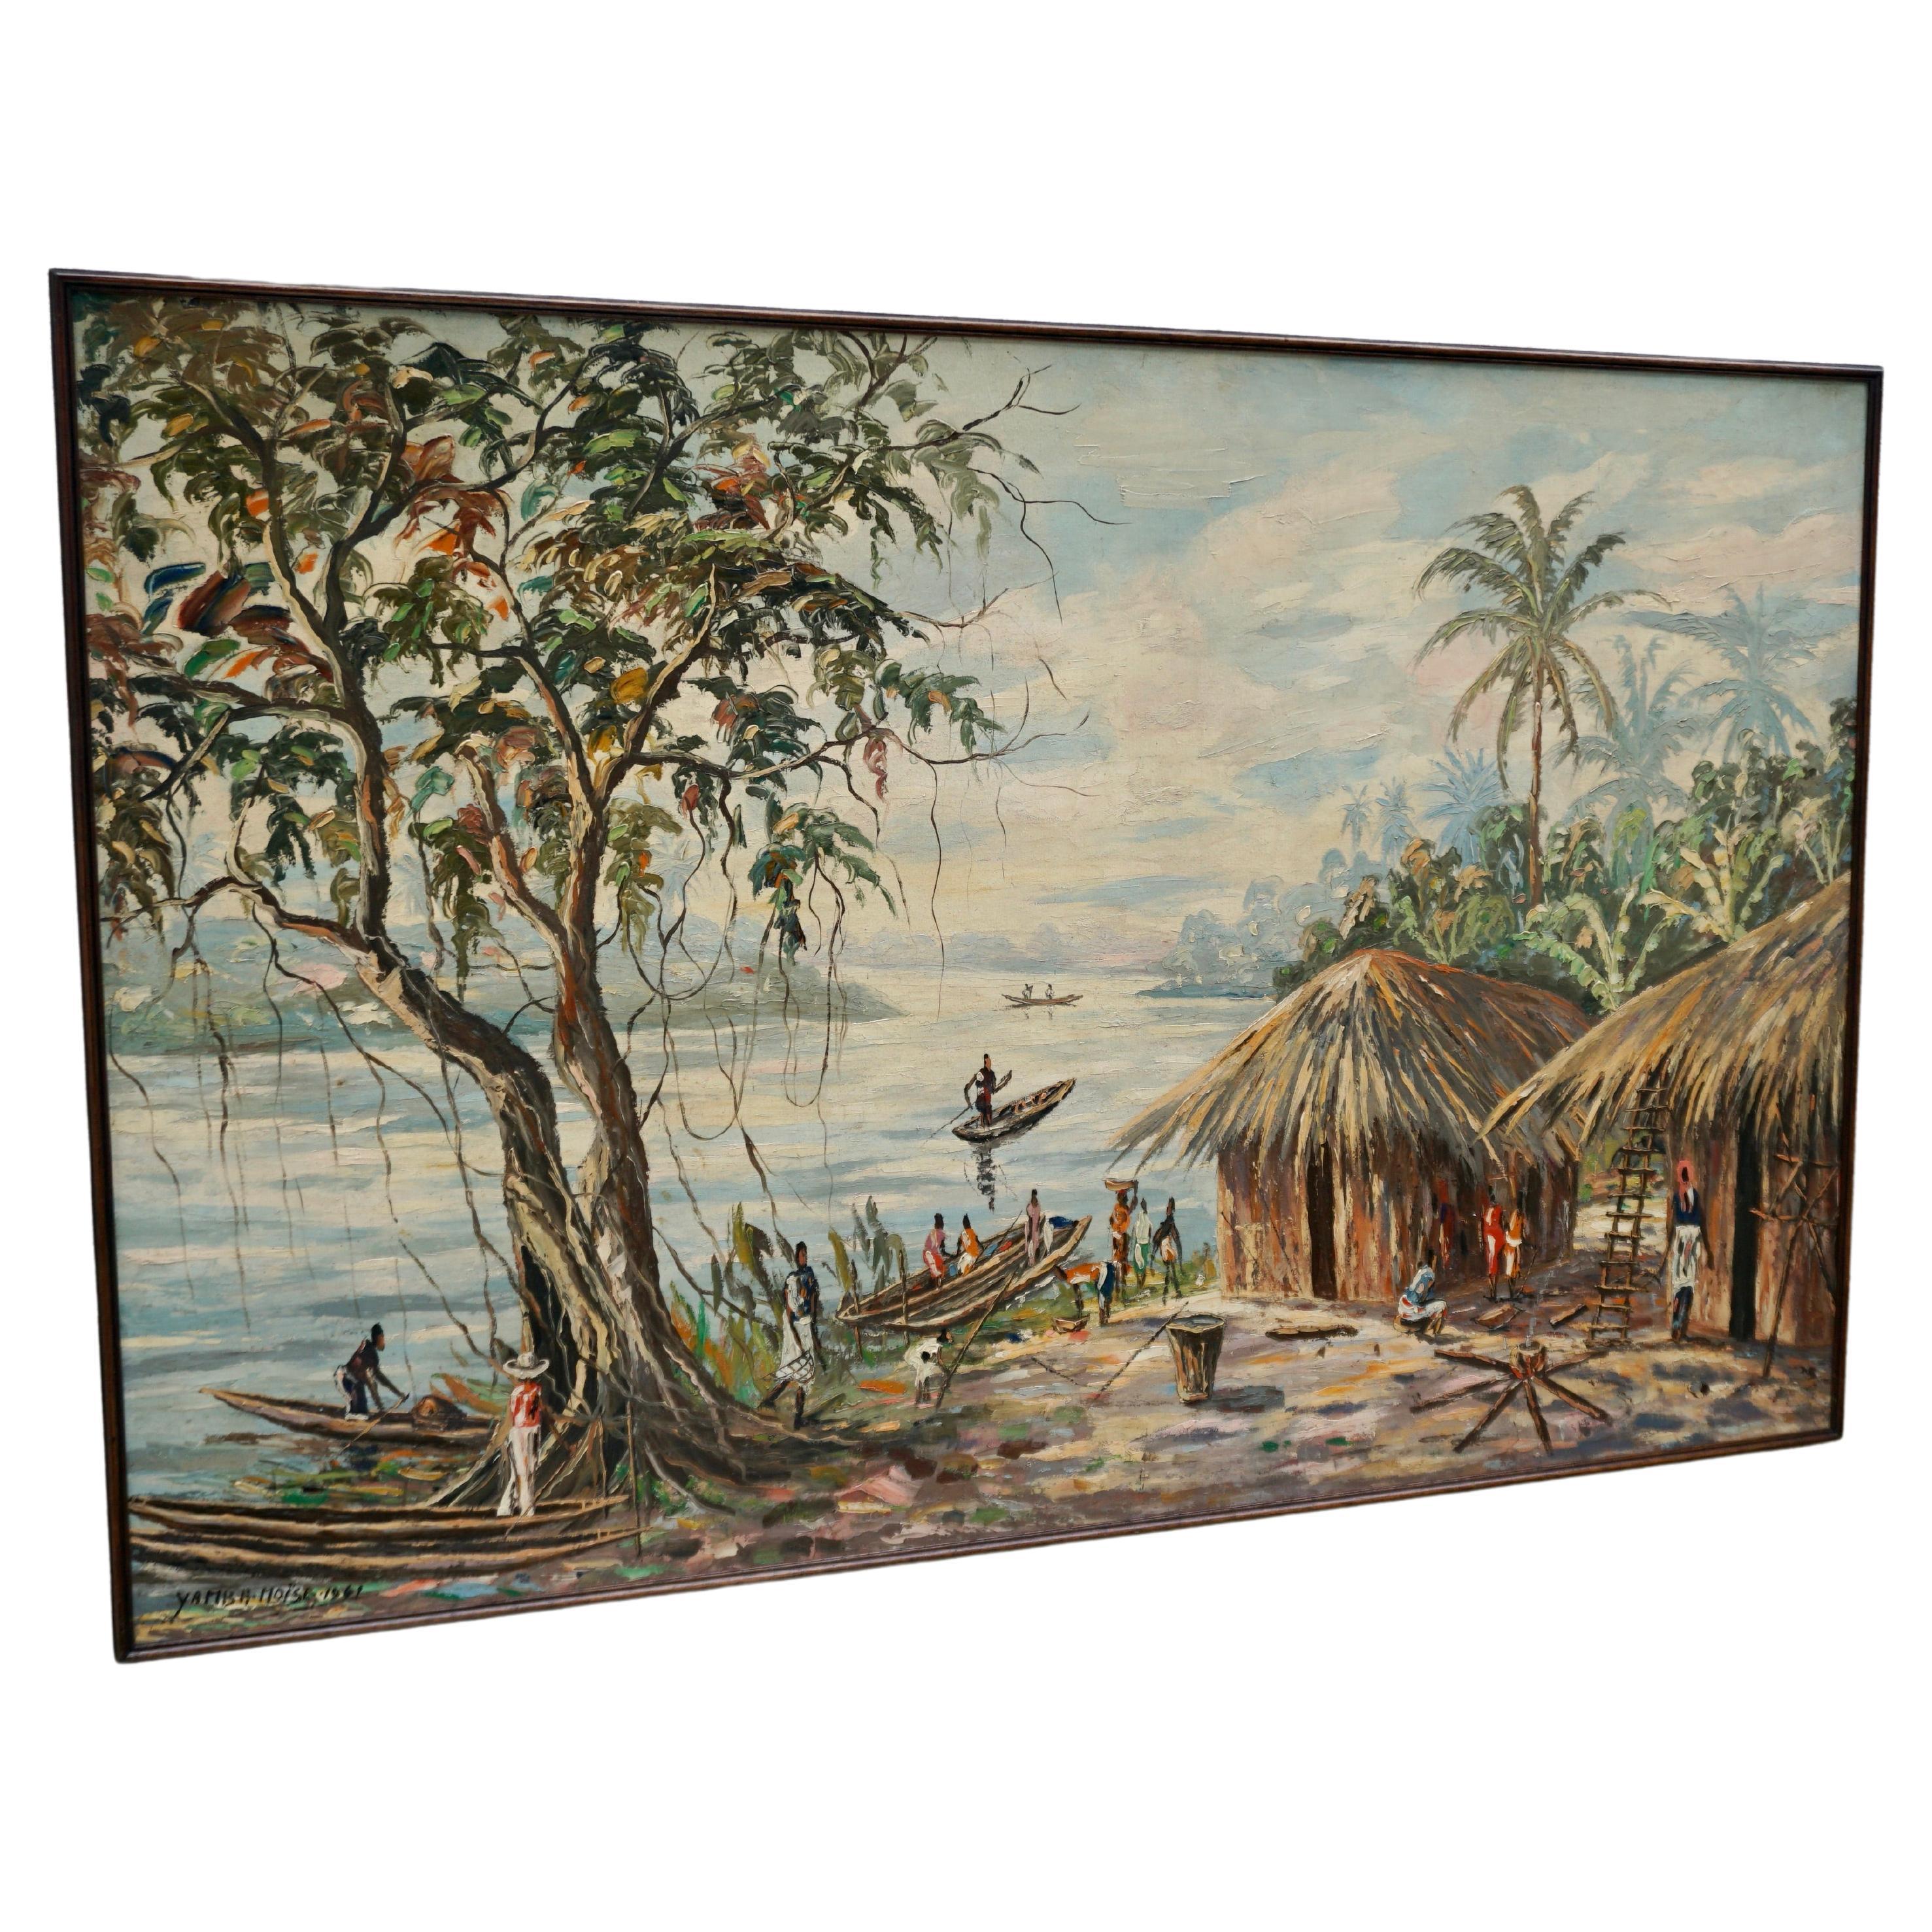 Settlement on the river with figures in boats between palm trees, oil on canvas. 117 x 77cm.
Signed Yamba Moise 1961.
Democratic Republic of the Congo.